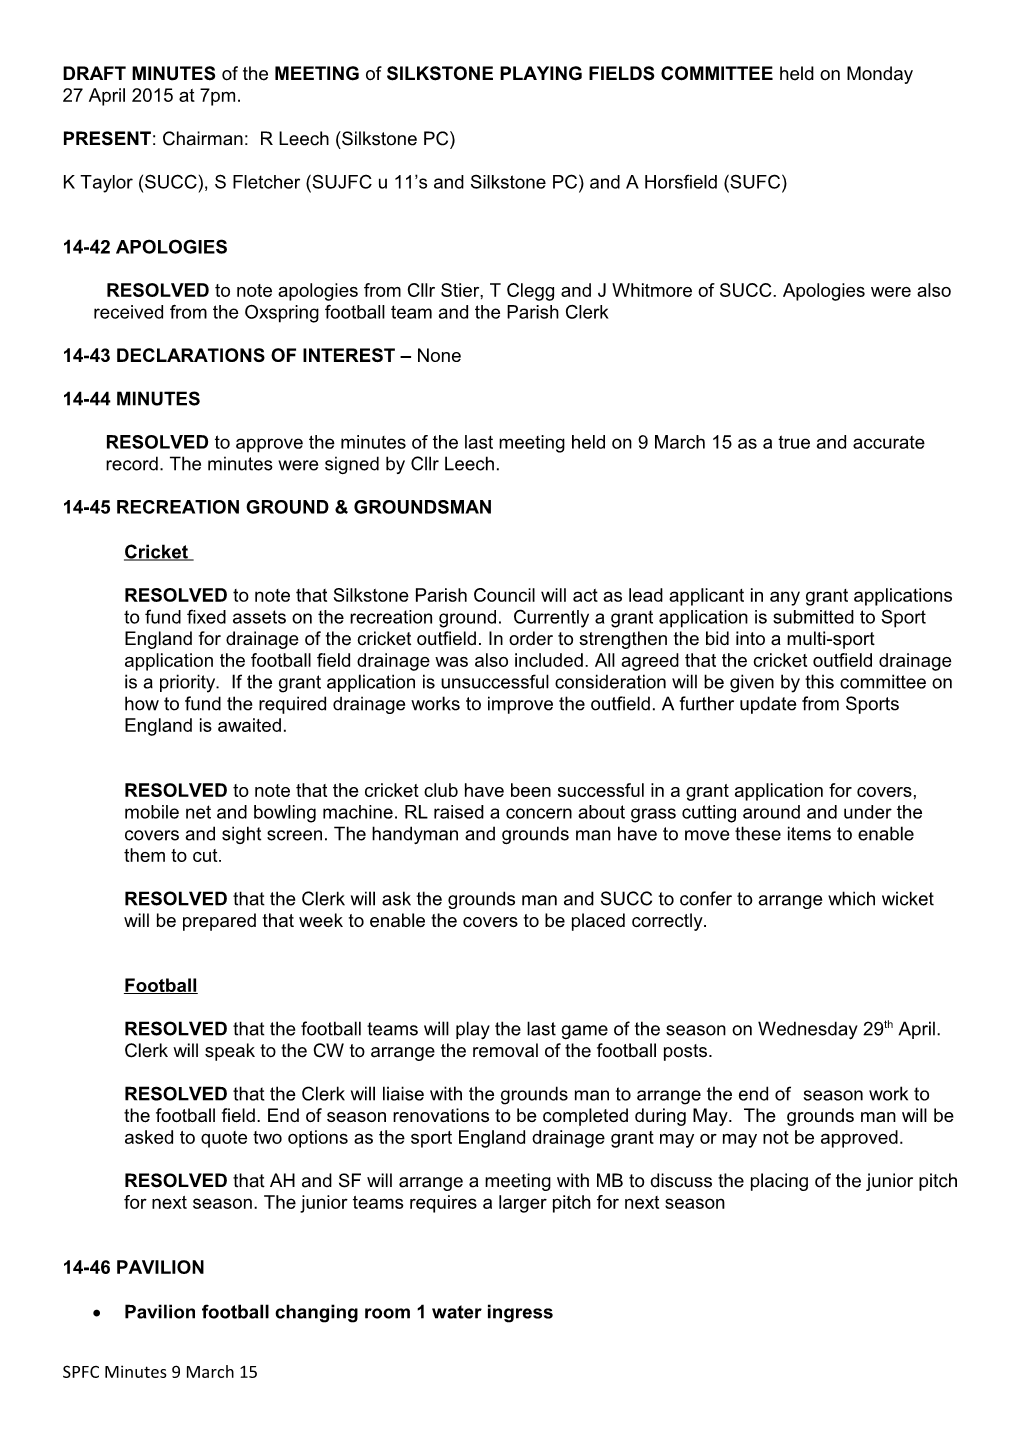 MINUTES of the MEETING of SILKSTONE PLAYING FIELDS COMMITTEE Held on Monday 20 September s3